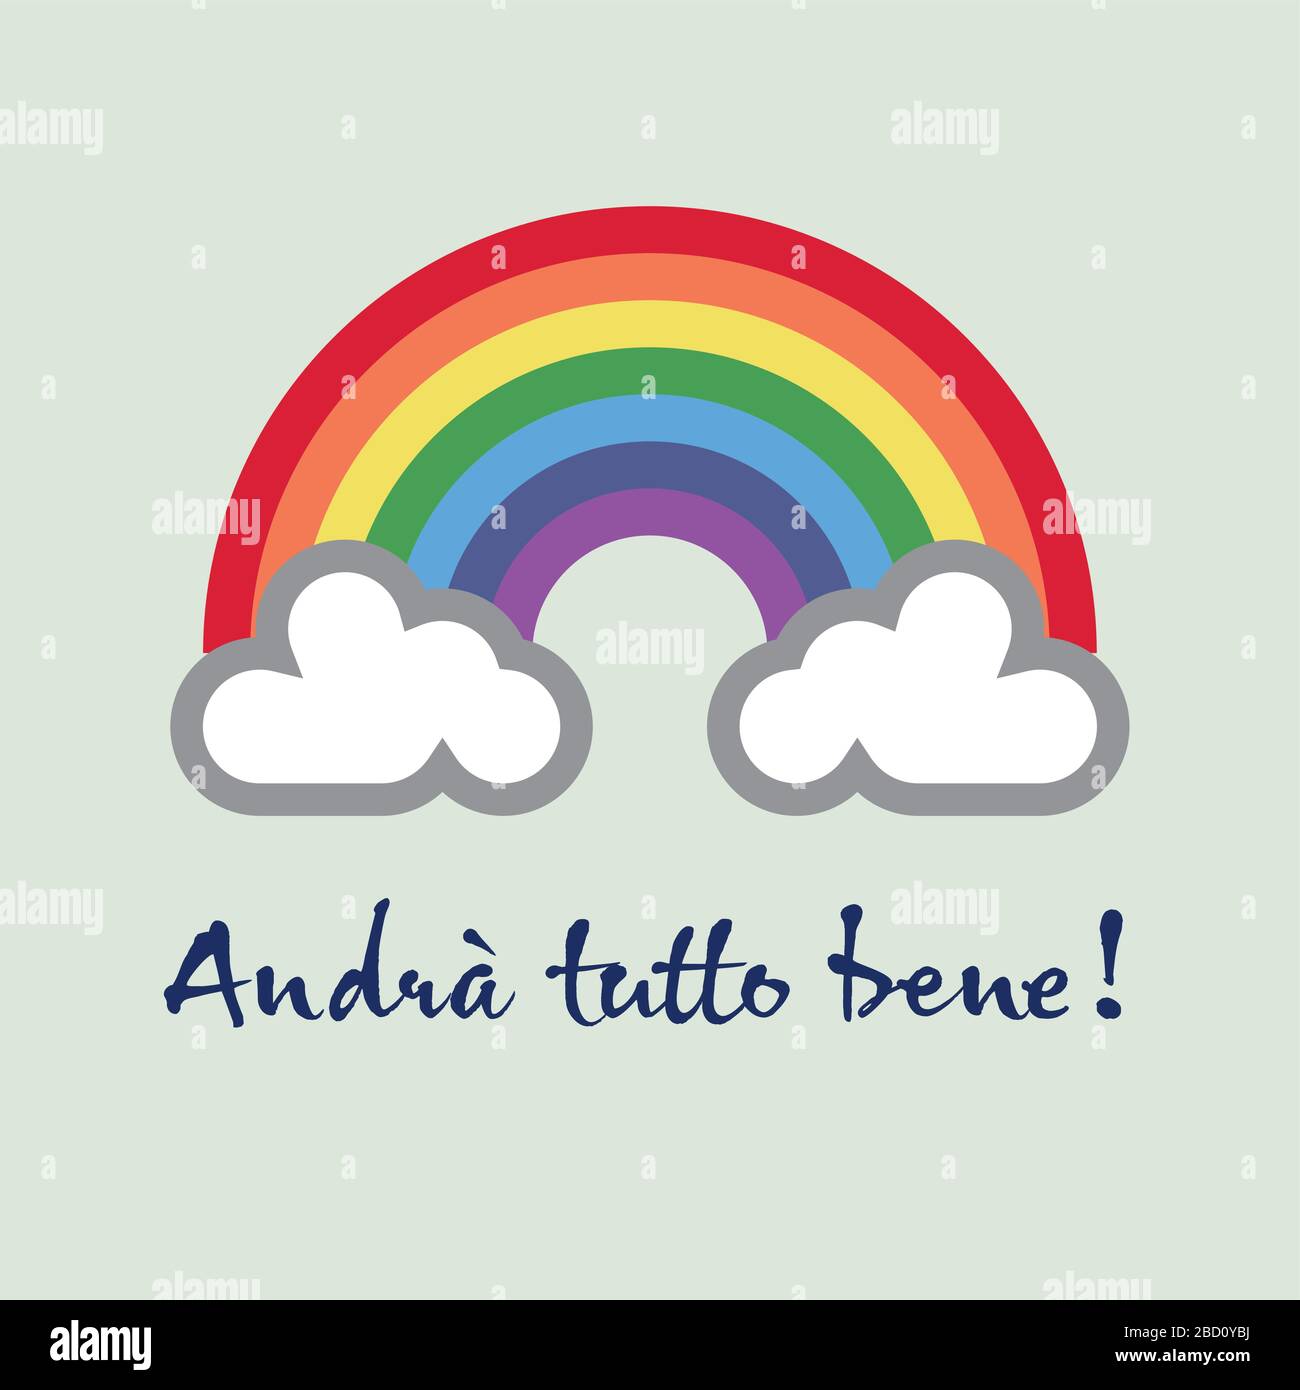 A rainbow for hope and wish: Andrà tutto bene - Everything gonna be alright Stock Vector